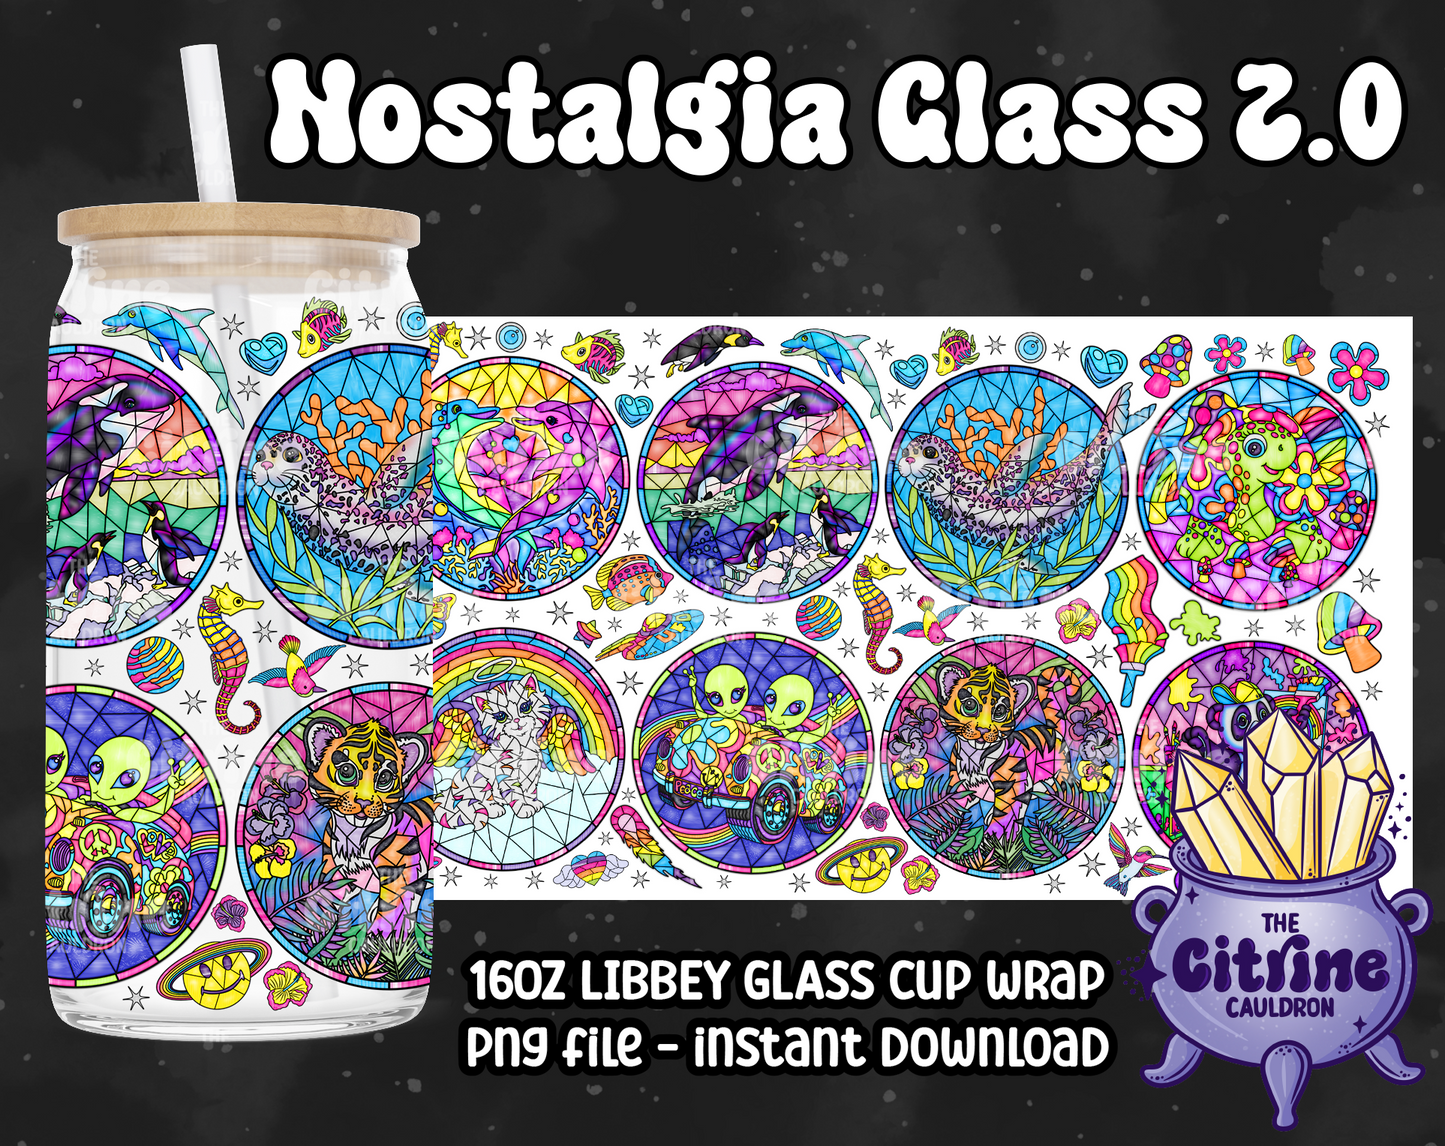 Nostalgia Glass 2.0 Mash Up - PNG Wrap for Libbey 16oz Glass Can